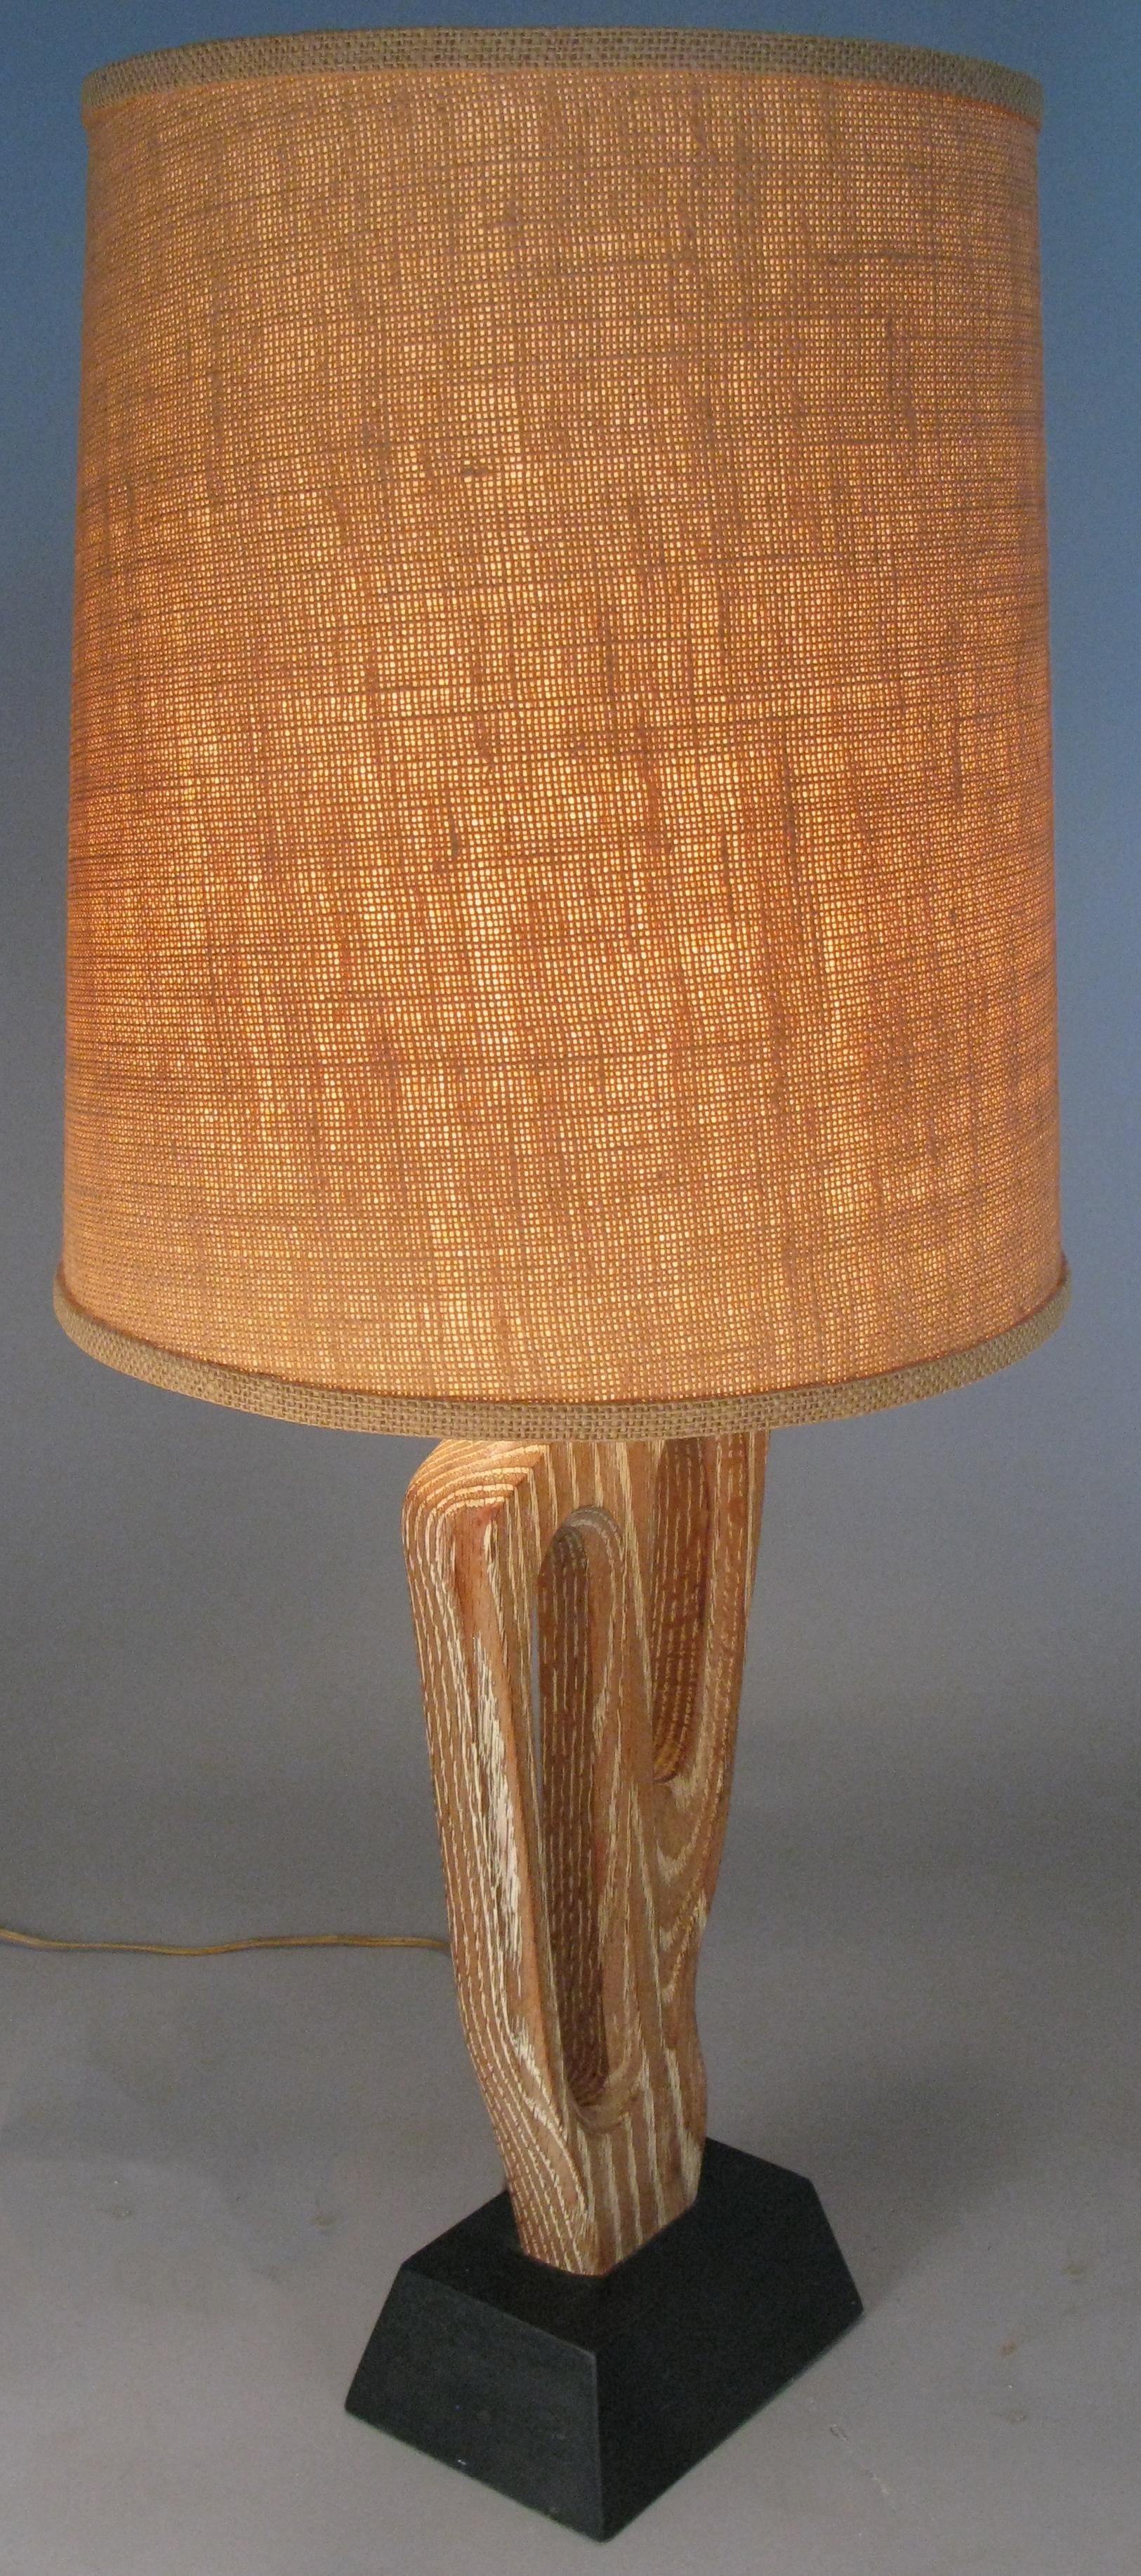 A beautiful vintage 1950s table lamp with an abstract carved and cerused oak form mounted on its original lacquered base, signed by the artist Yasha Heifetz. with its original shade.